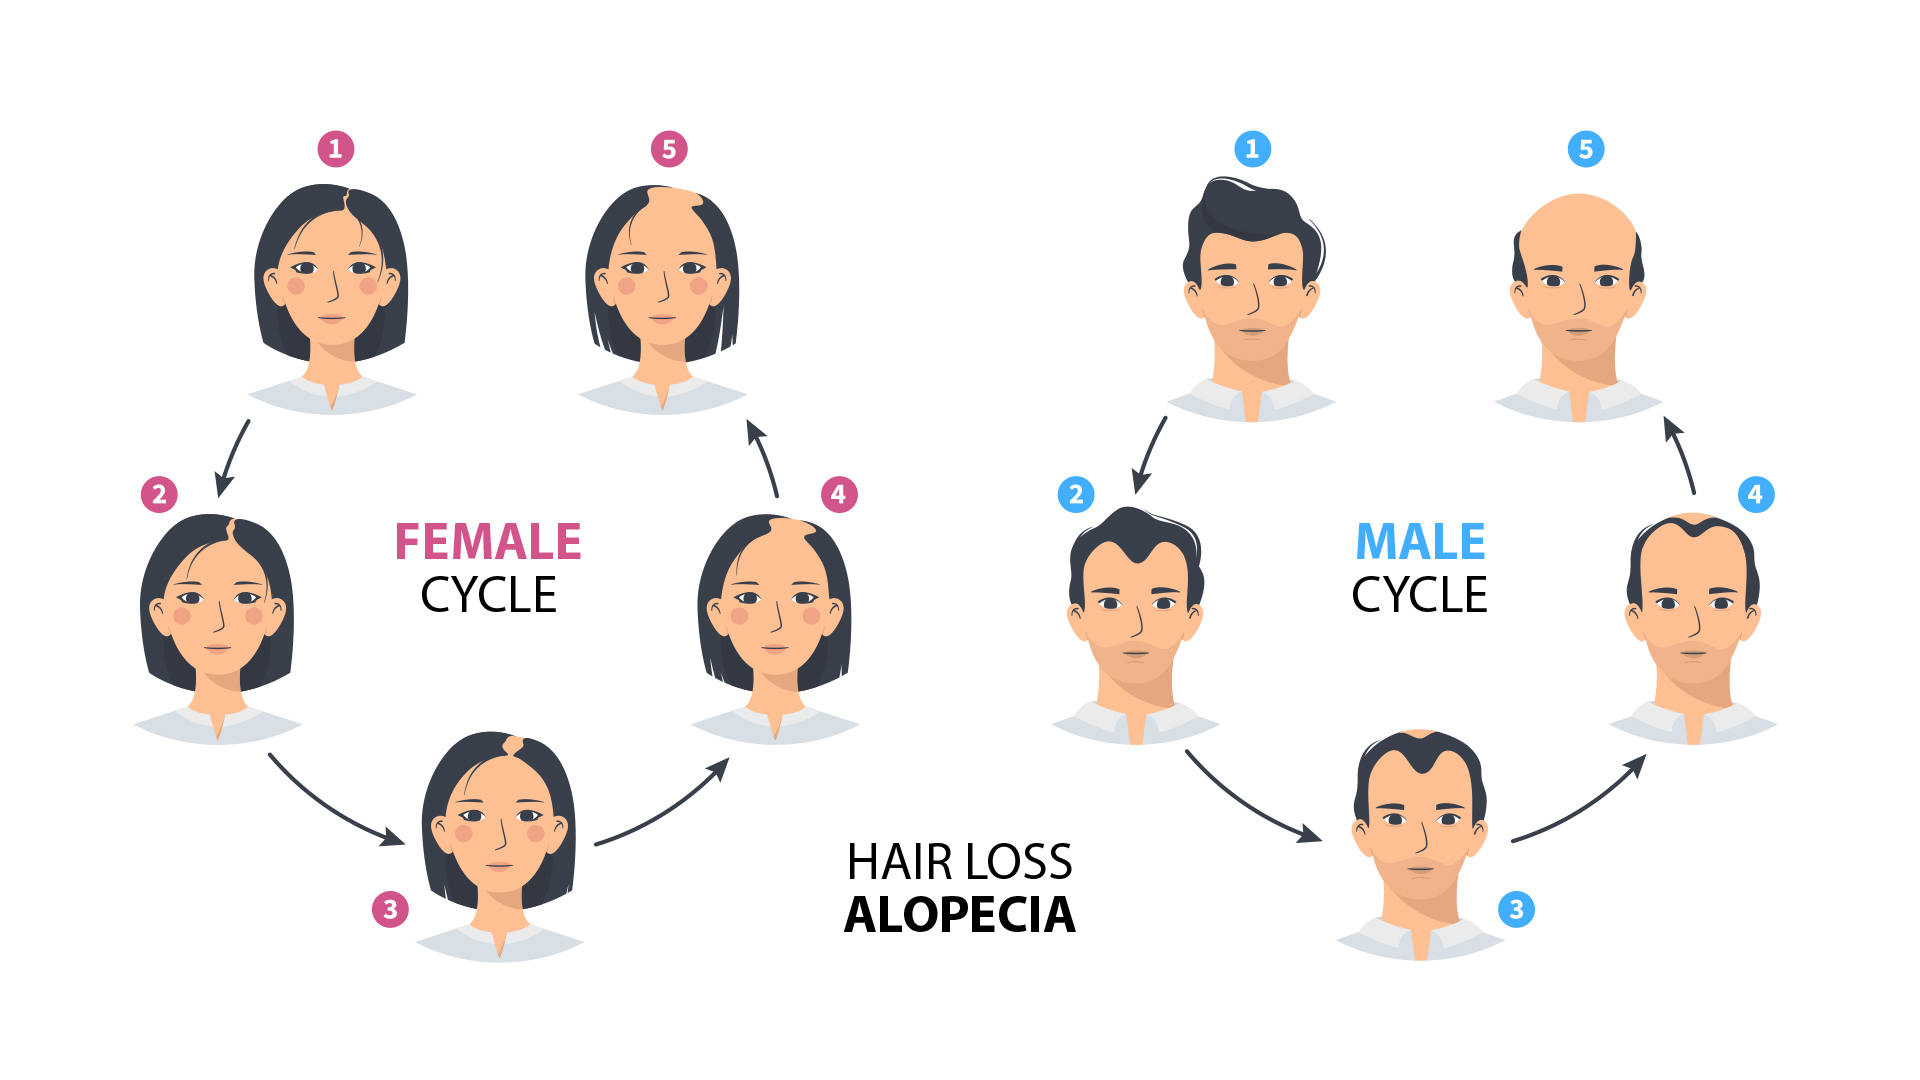 The scale of Androgenetic Alopecia in both men and women